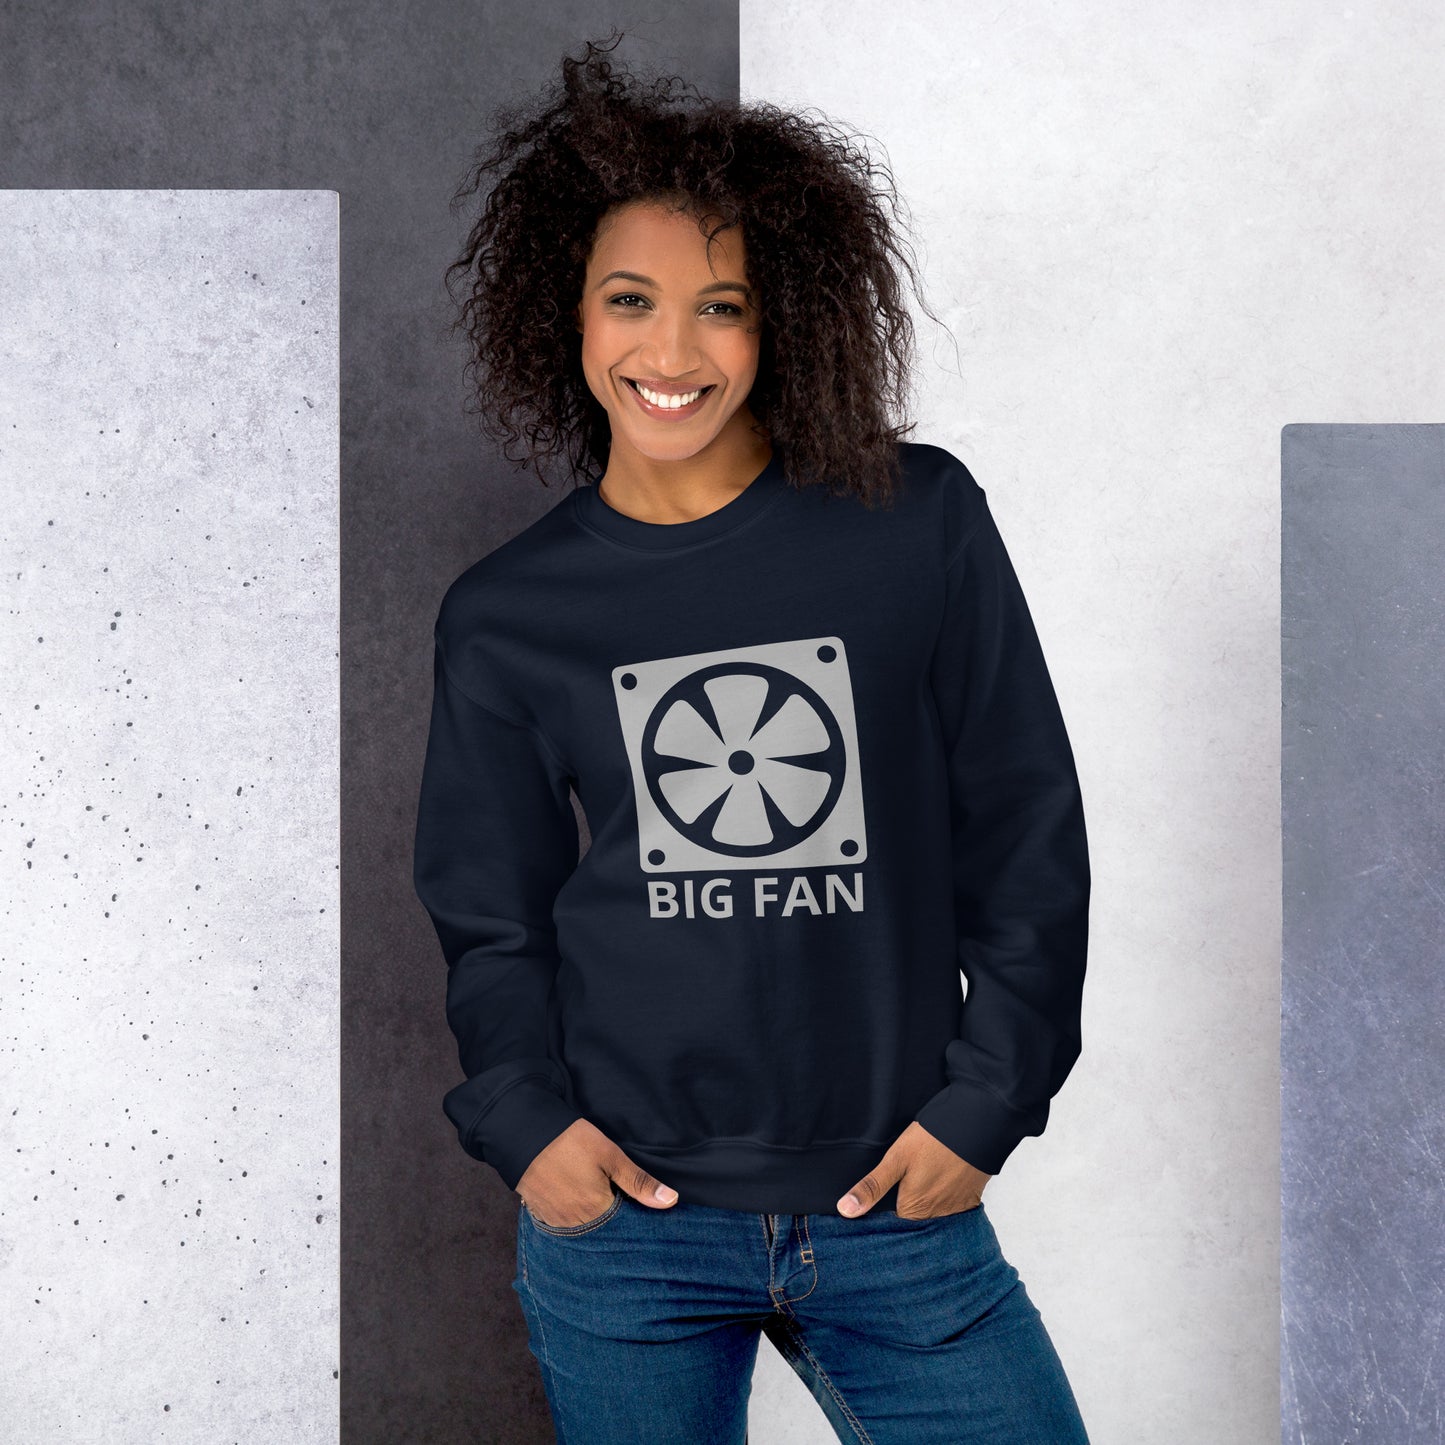 Women with navy blue sweatshirt with image of a big computer fan and the text "BIG FAN"